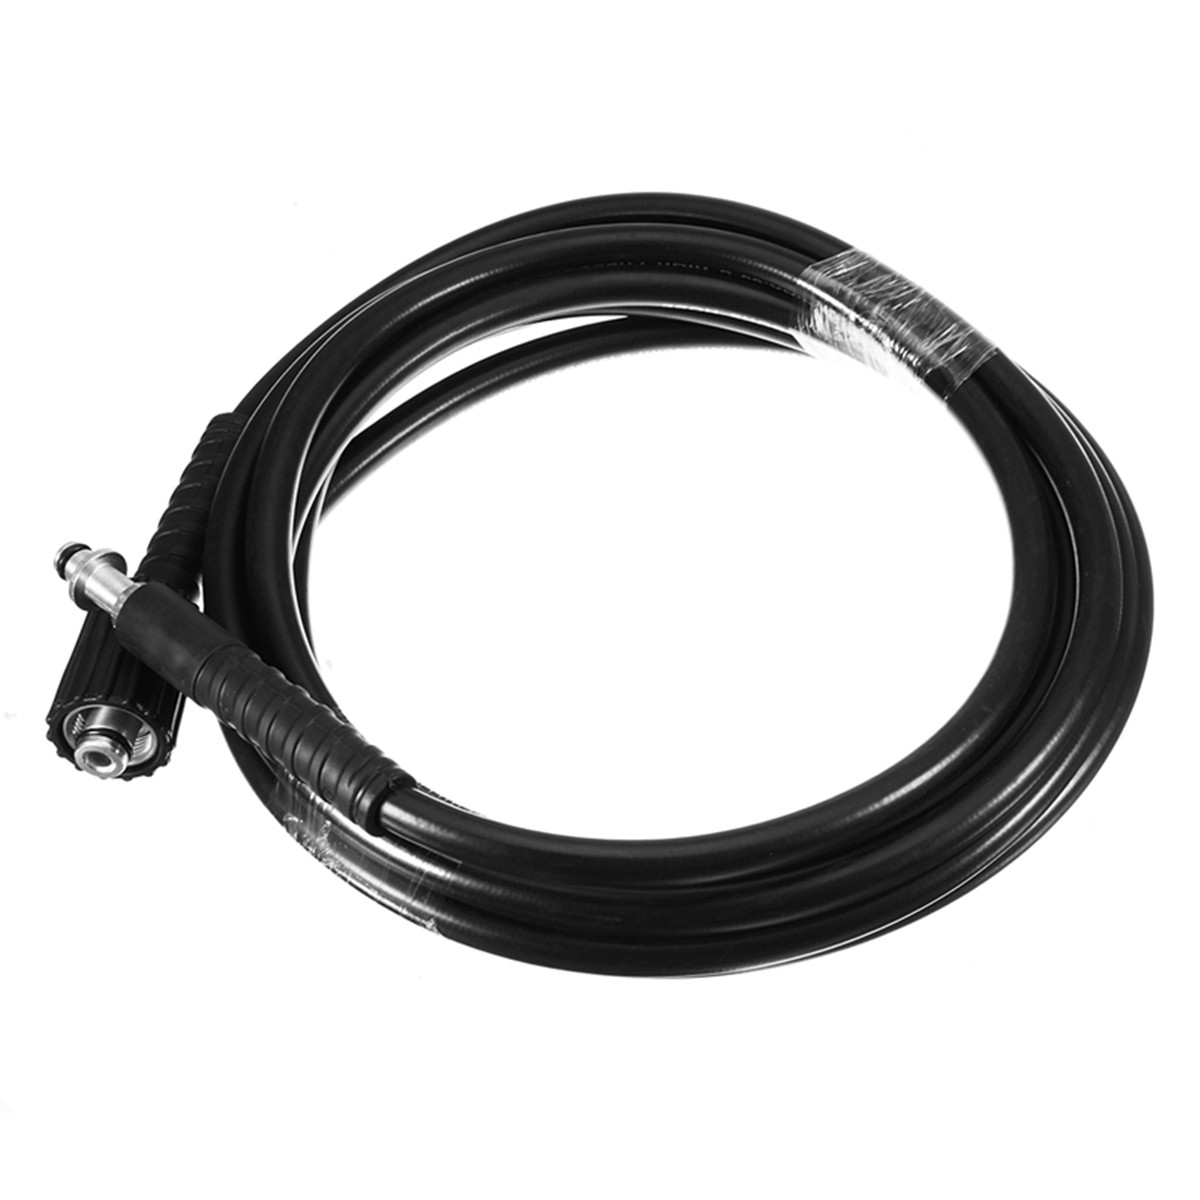 5M-High-Pressure-Washer-Hose-9mm-Quick-Connect-to-M22-Washer-Adaptor-1297172-4